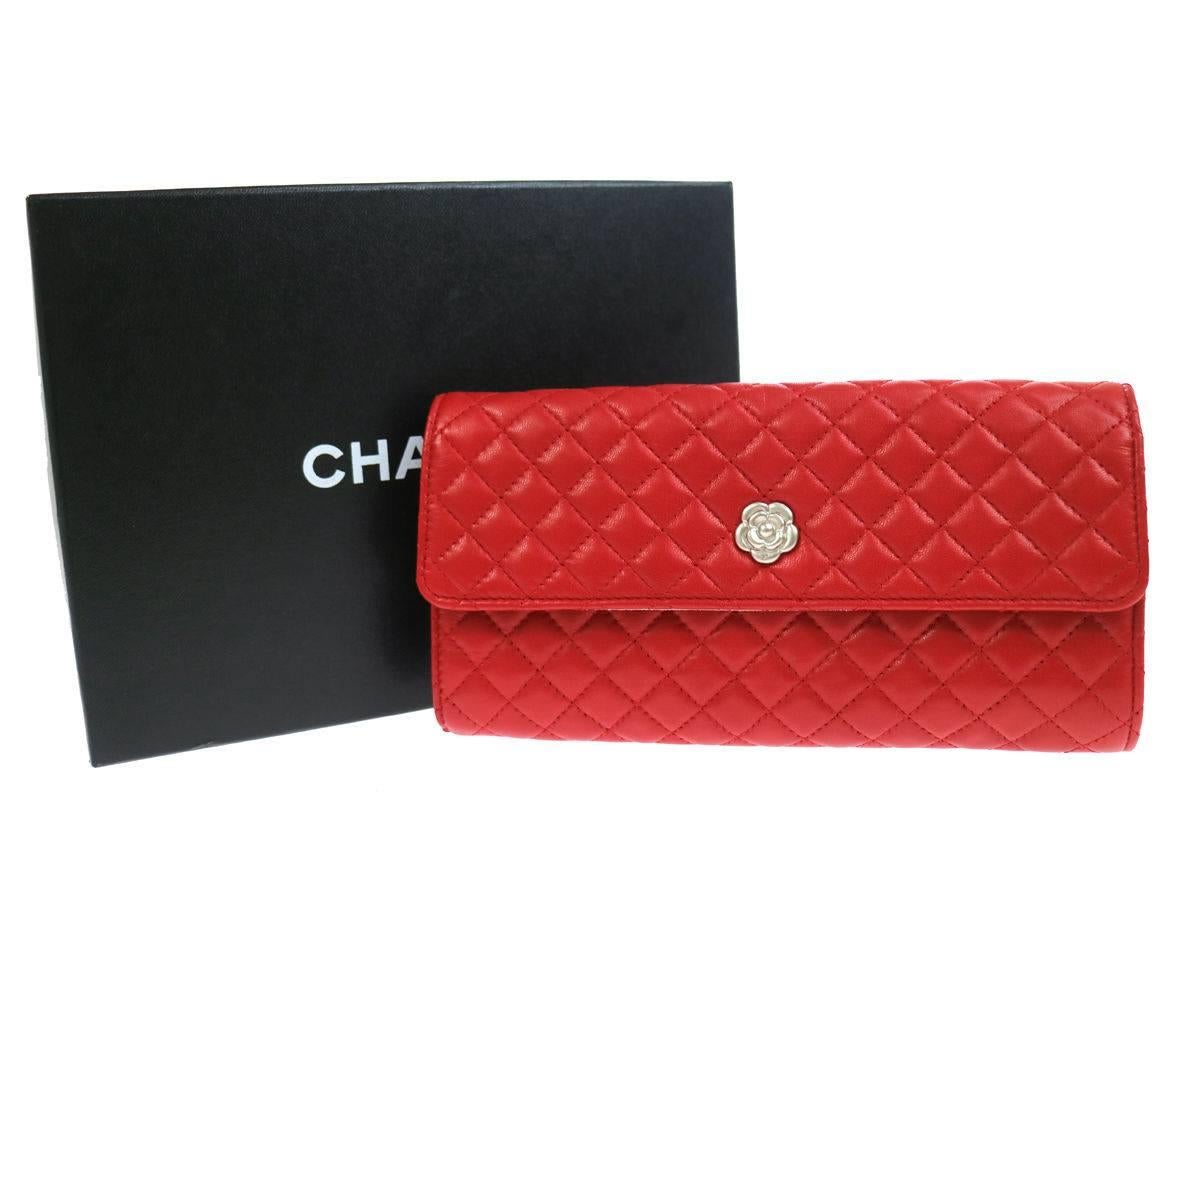 CURATOR'S NOTES

Store your Chanel in Chanel.  Chanel NEW Red Lambskin Jewelry Case Travel Clutch Bag Roll in Box

Lambskin
Silver hardware
Snap closure
Date code 15871678
Made in Italy
Measures 7.9" W x 4.7" H x 1" D 
Includes